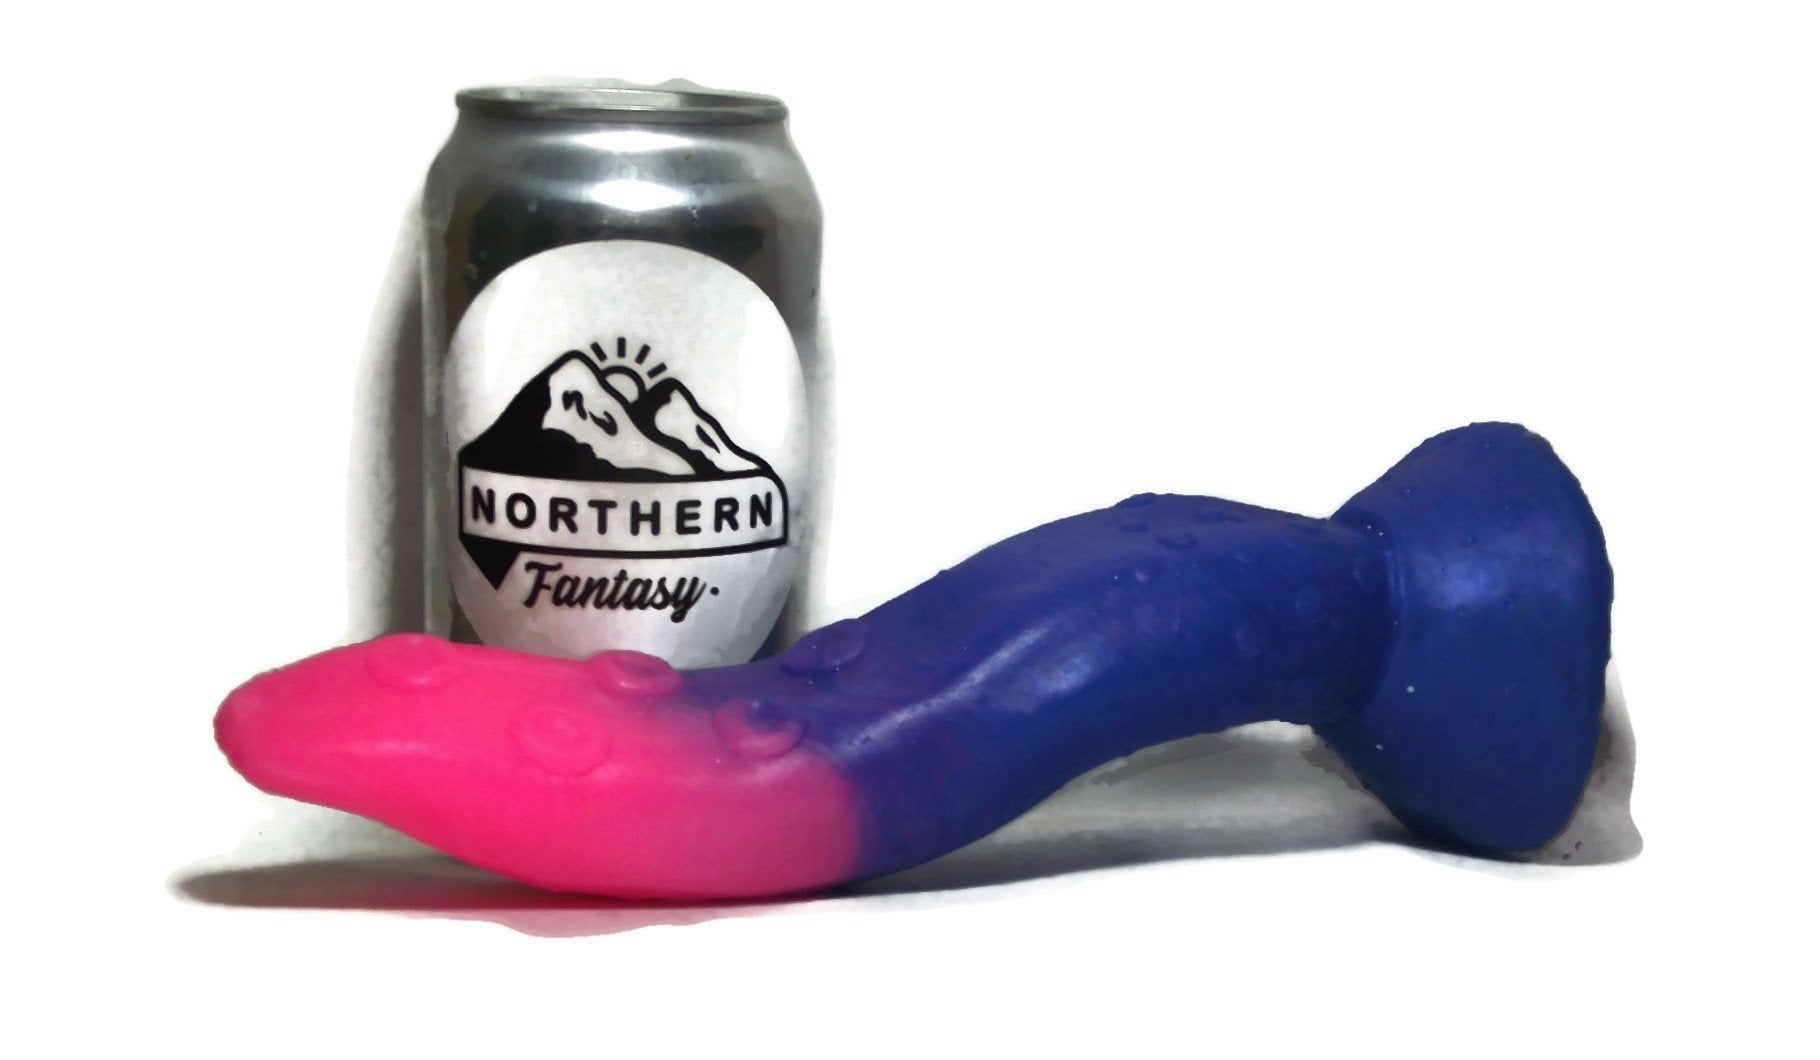 the blue and pink textured tongue toy next to a soda can 